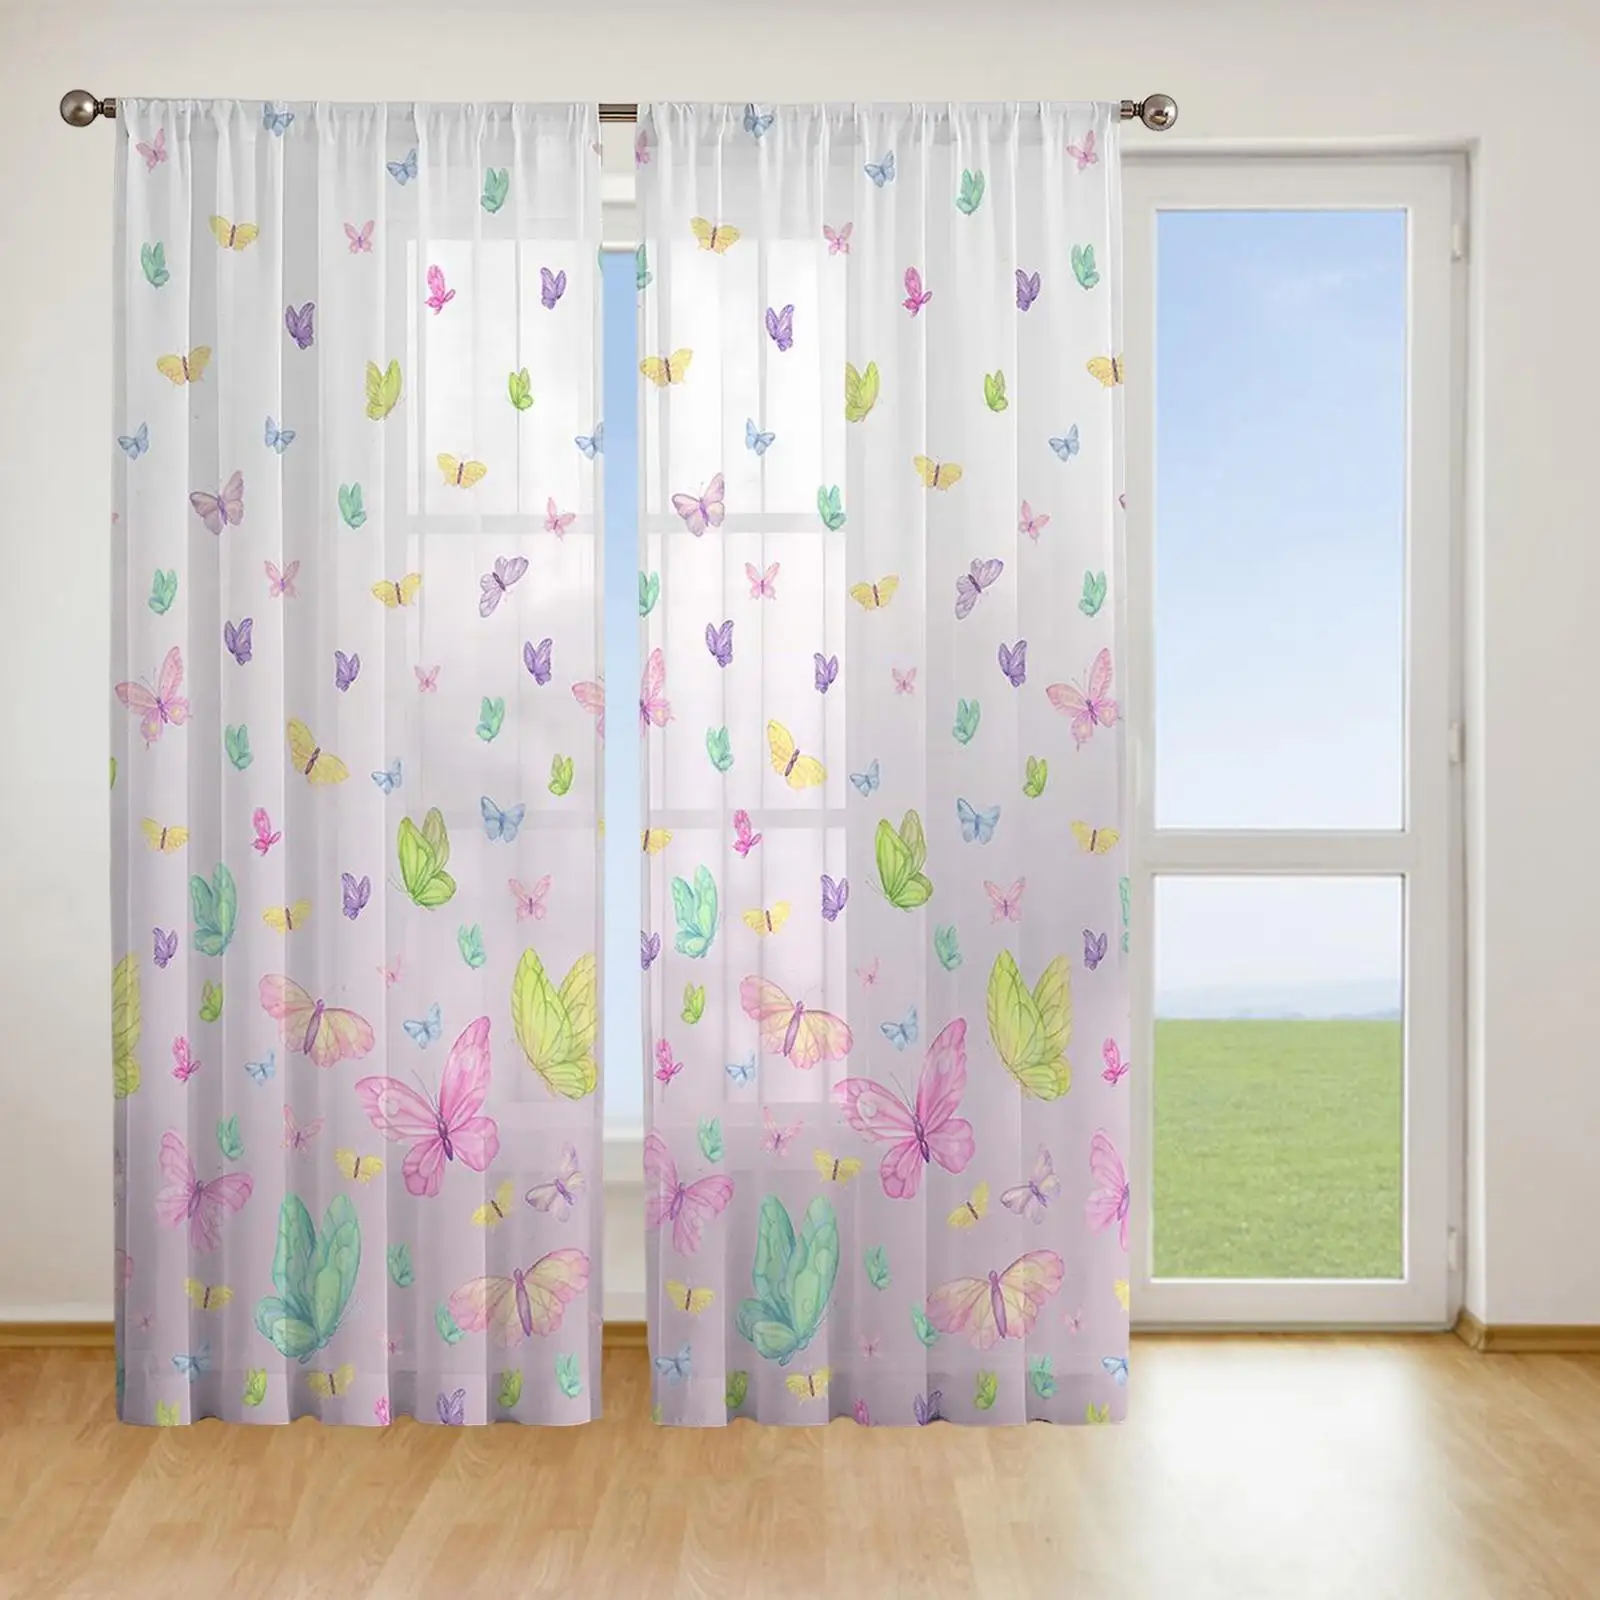 Colorful Butterfly Print Sheer Curtains Drapes Machine Washable Sturdy Polyester Fabric Grommet Top for Living Room, Bedroom